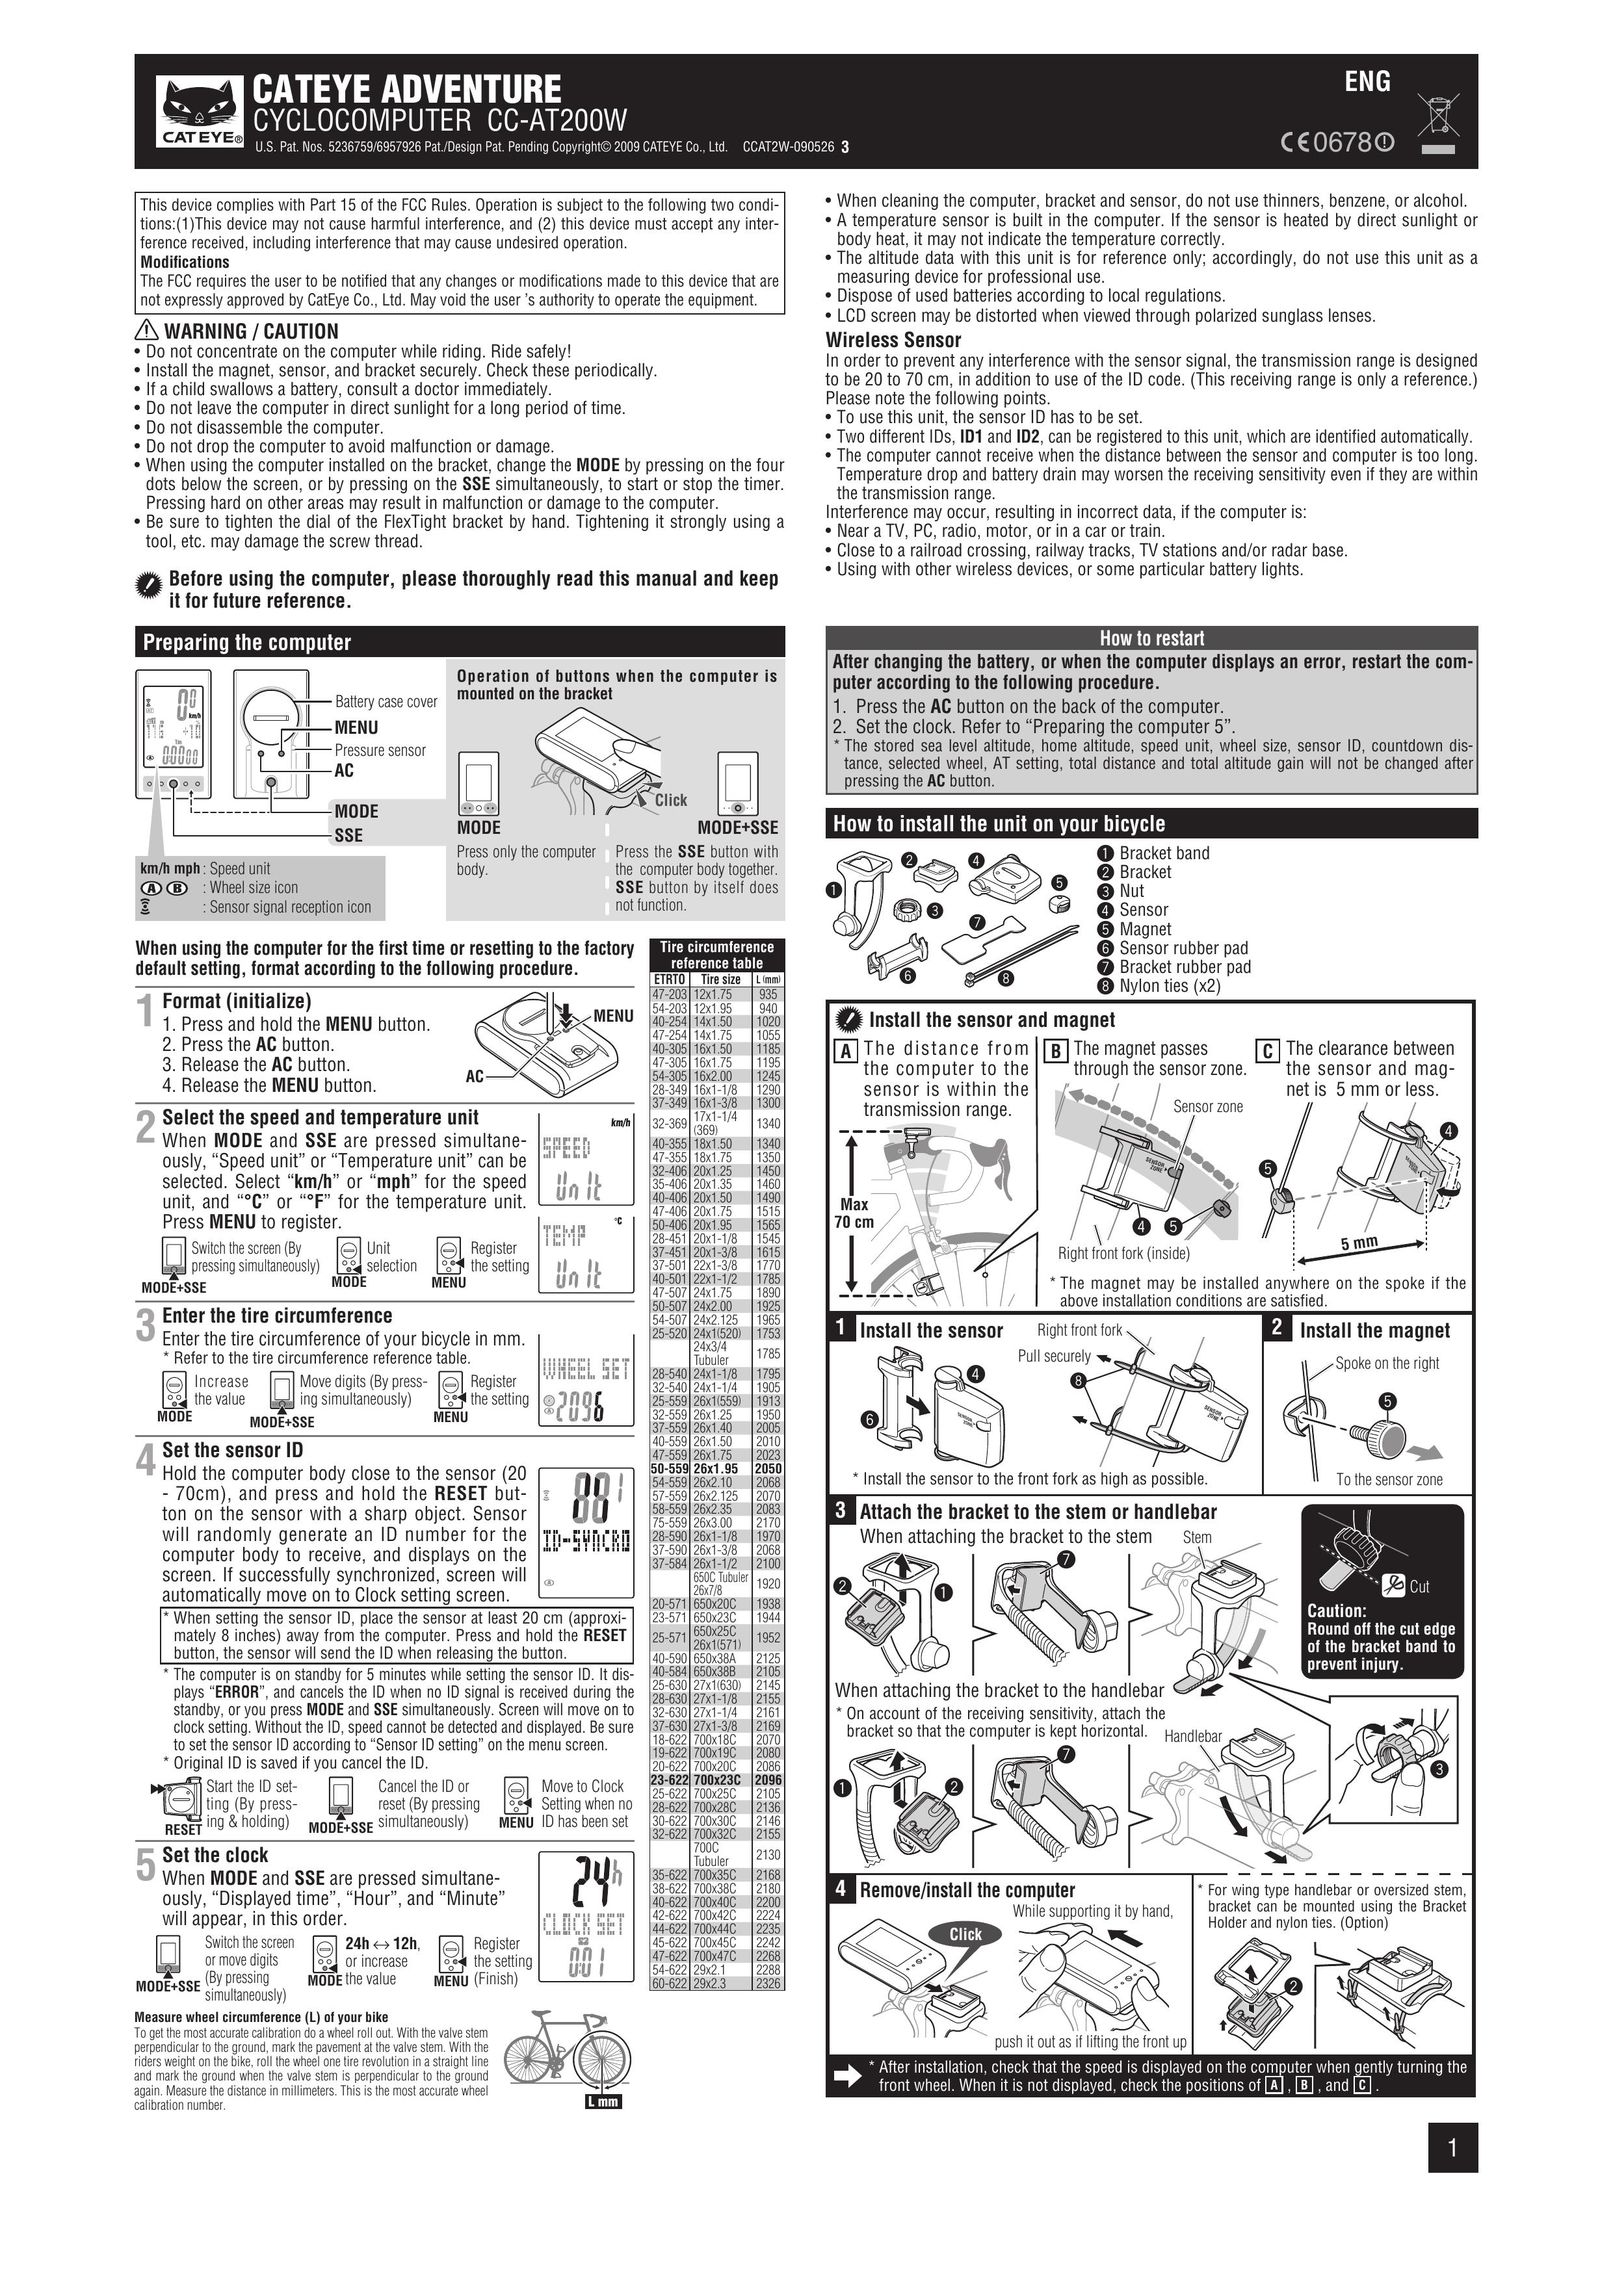 Cateye CCAT2W-090526 Bicycle Accessories User Manual